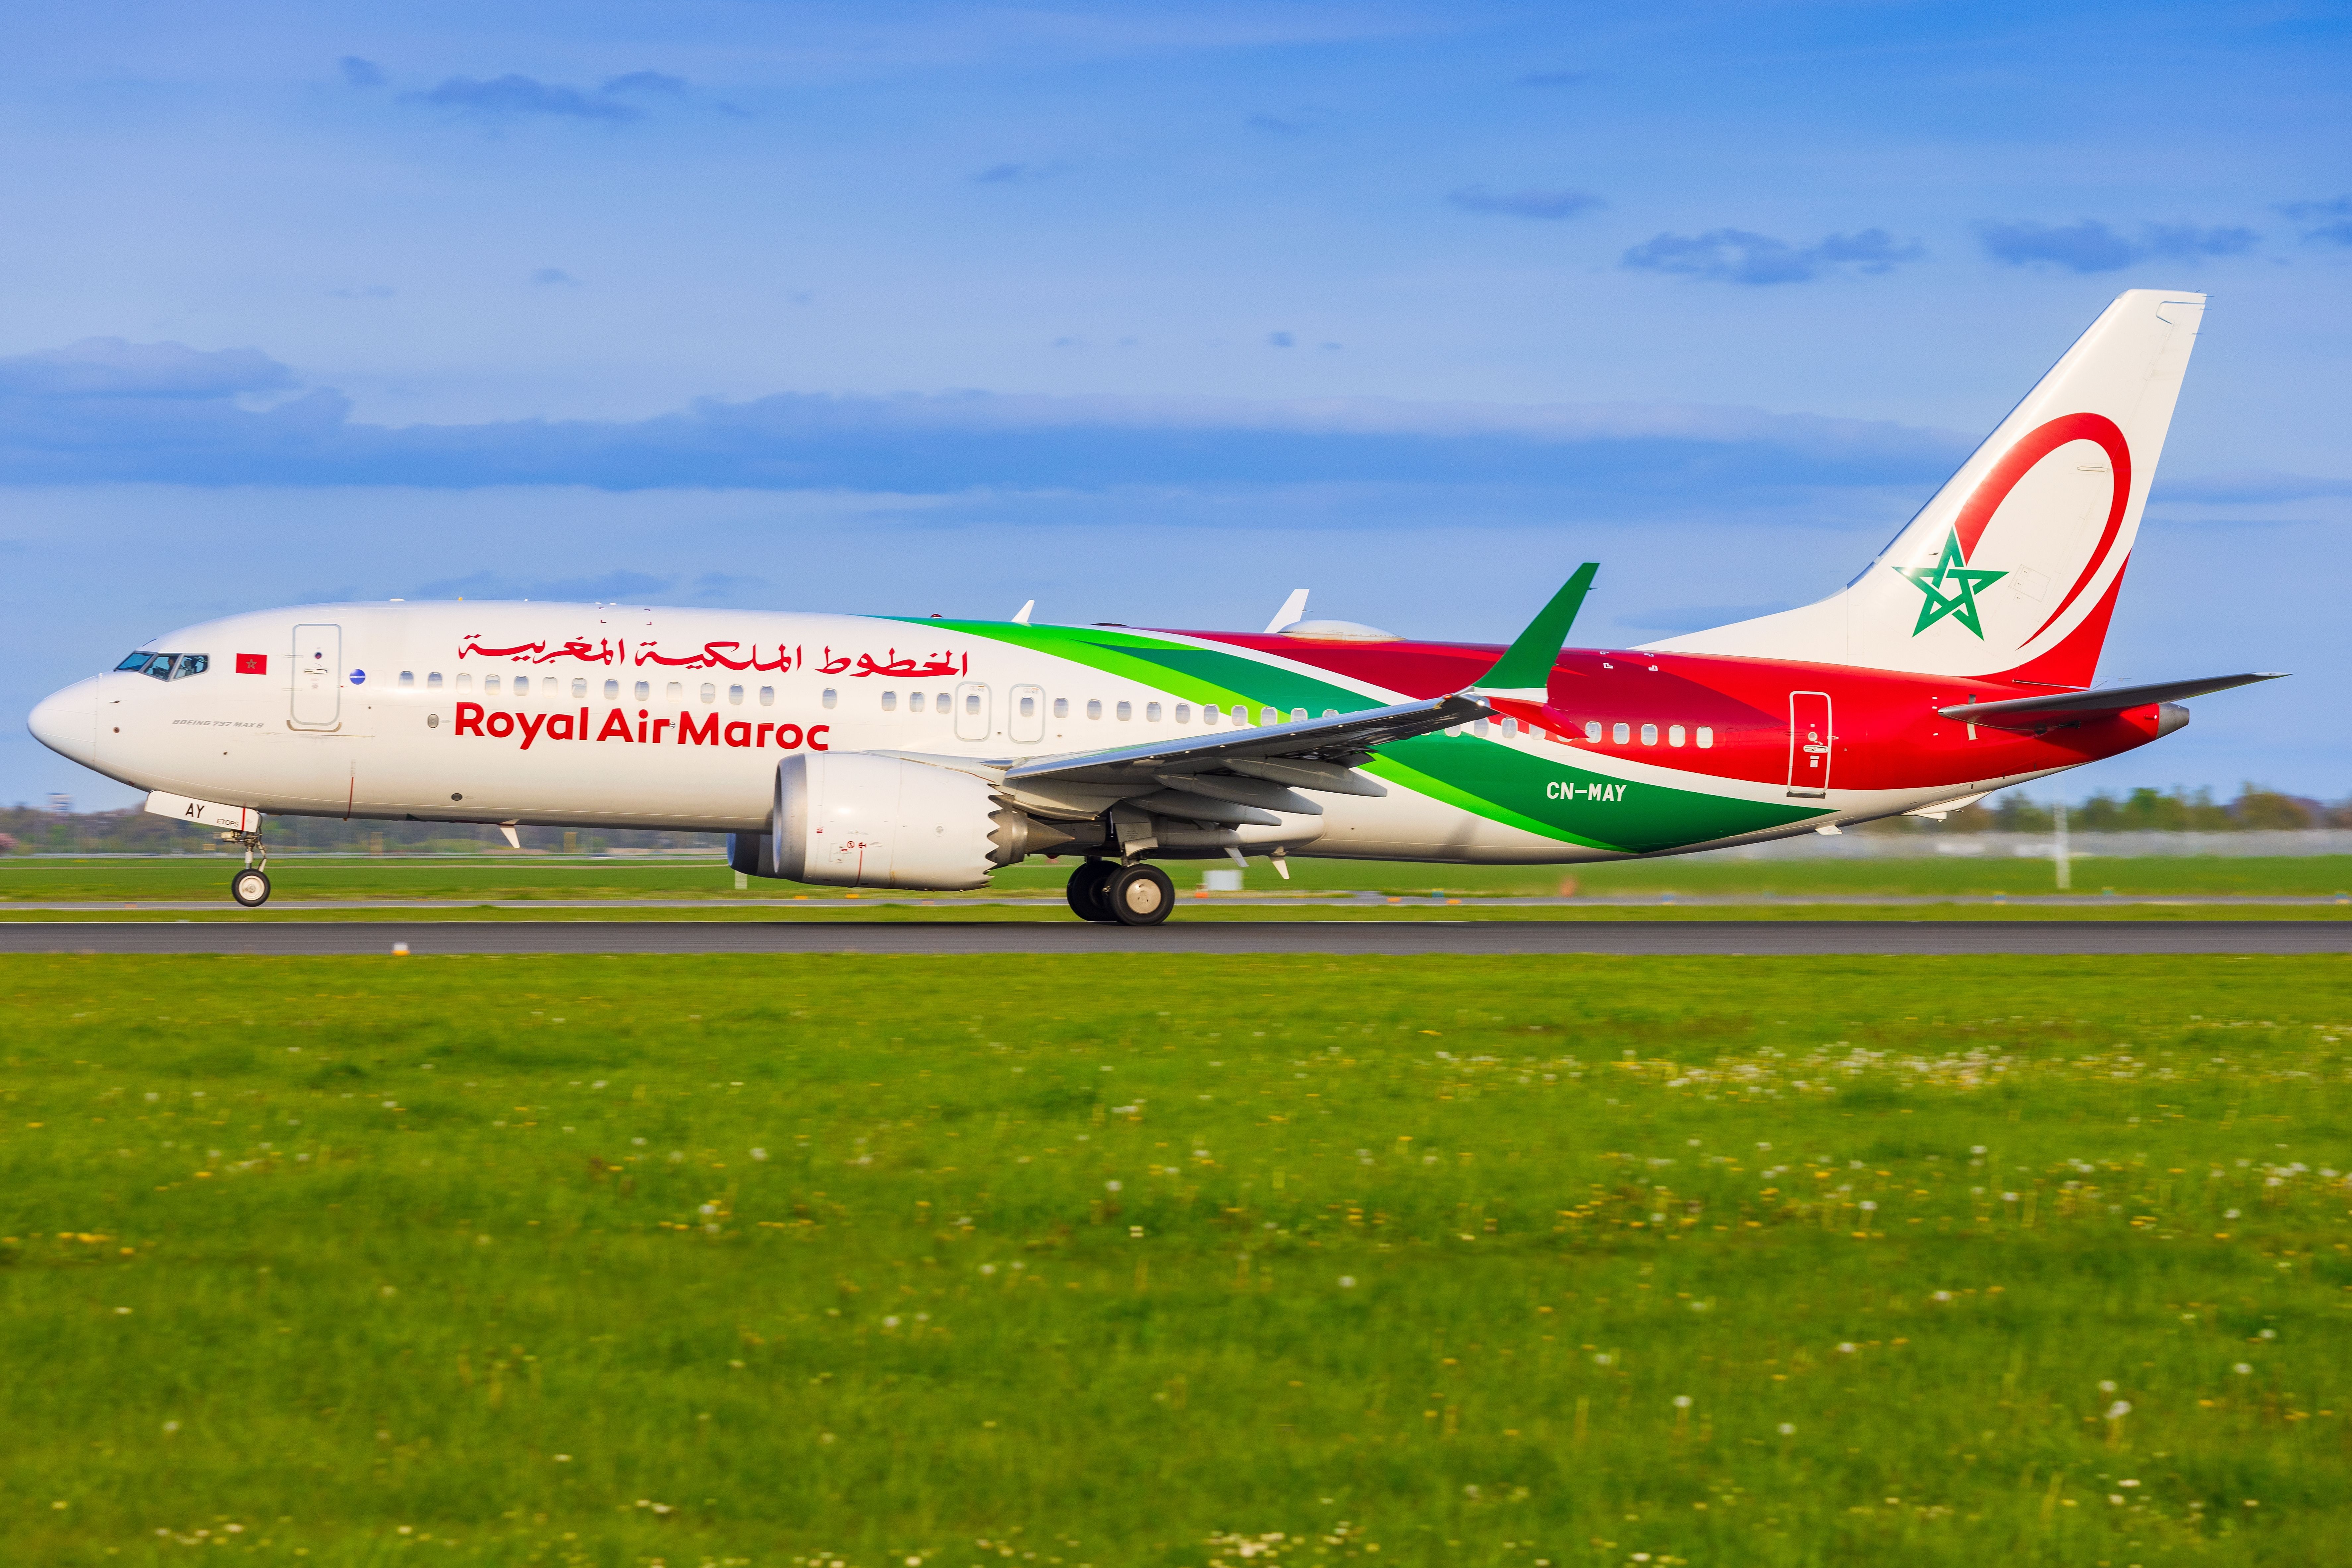 A Royal Air Maroc Boeing 737 MAX about to take off.